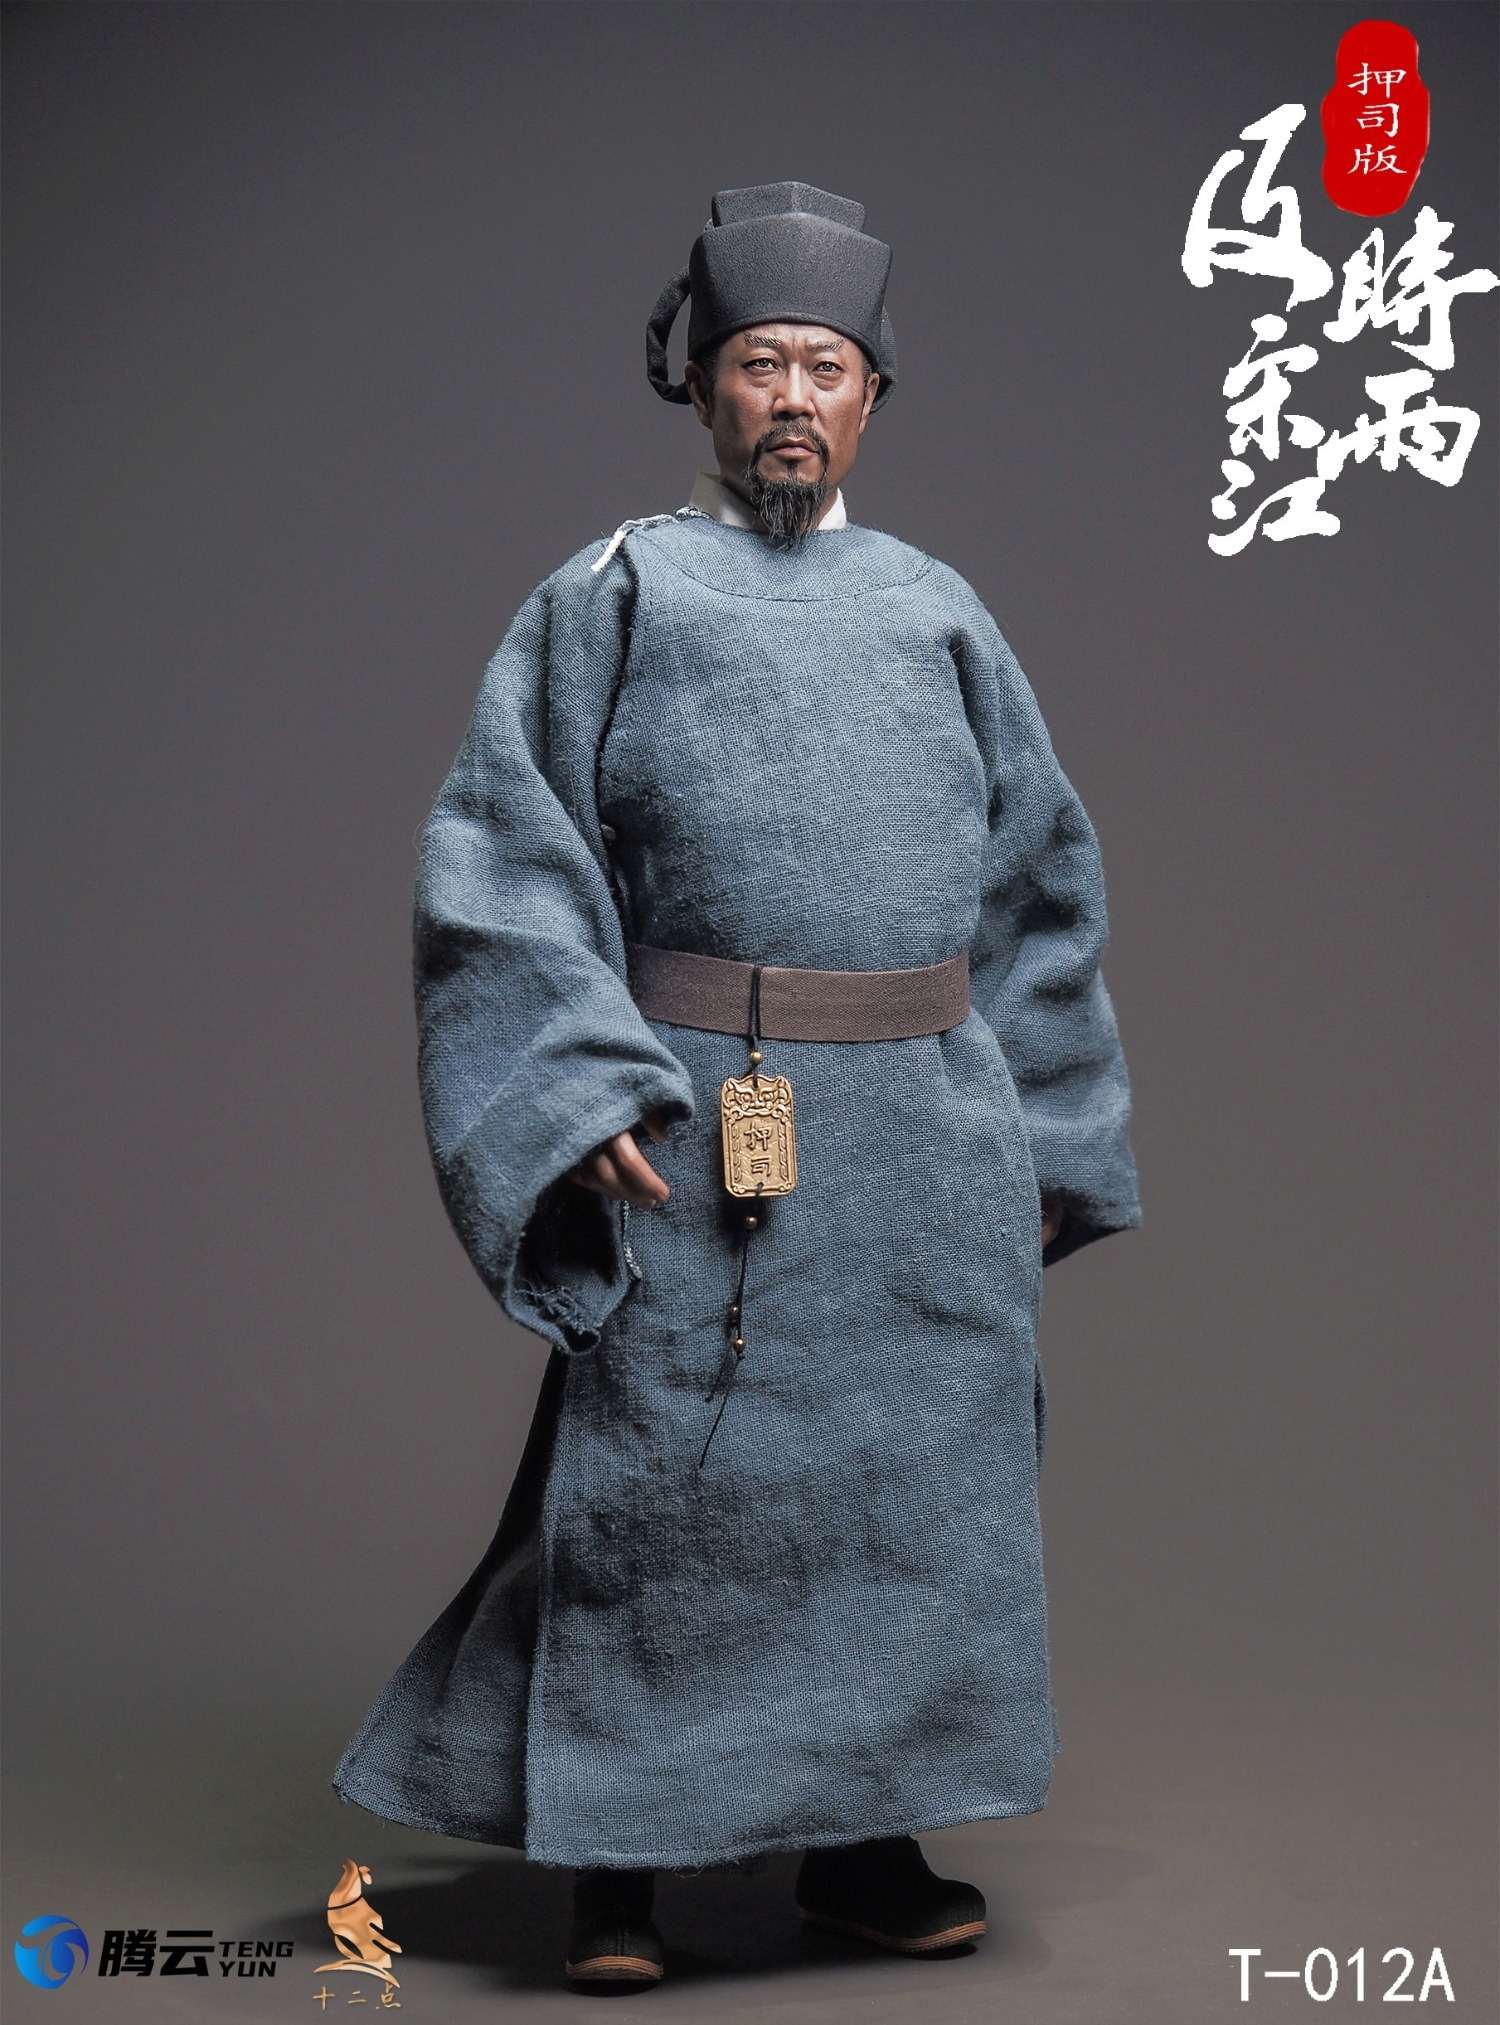 chinese - NEW PRODUCT: Twelve O'Clock - Hero Series - Timely Rain Song Jiang (Oshi Version / Leader Version) #T-012A/B/C/D 08104